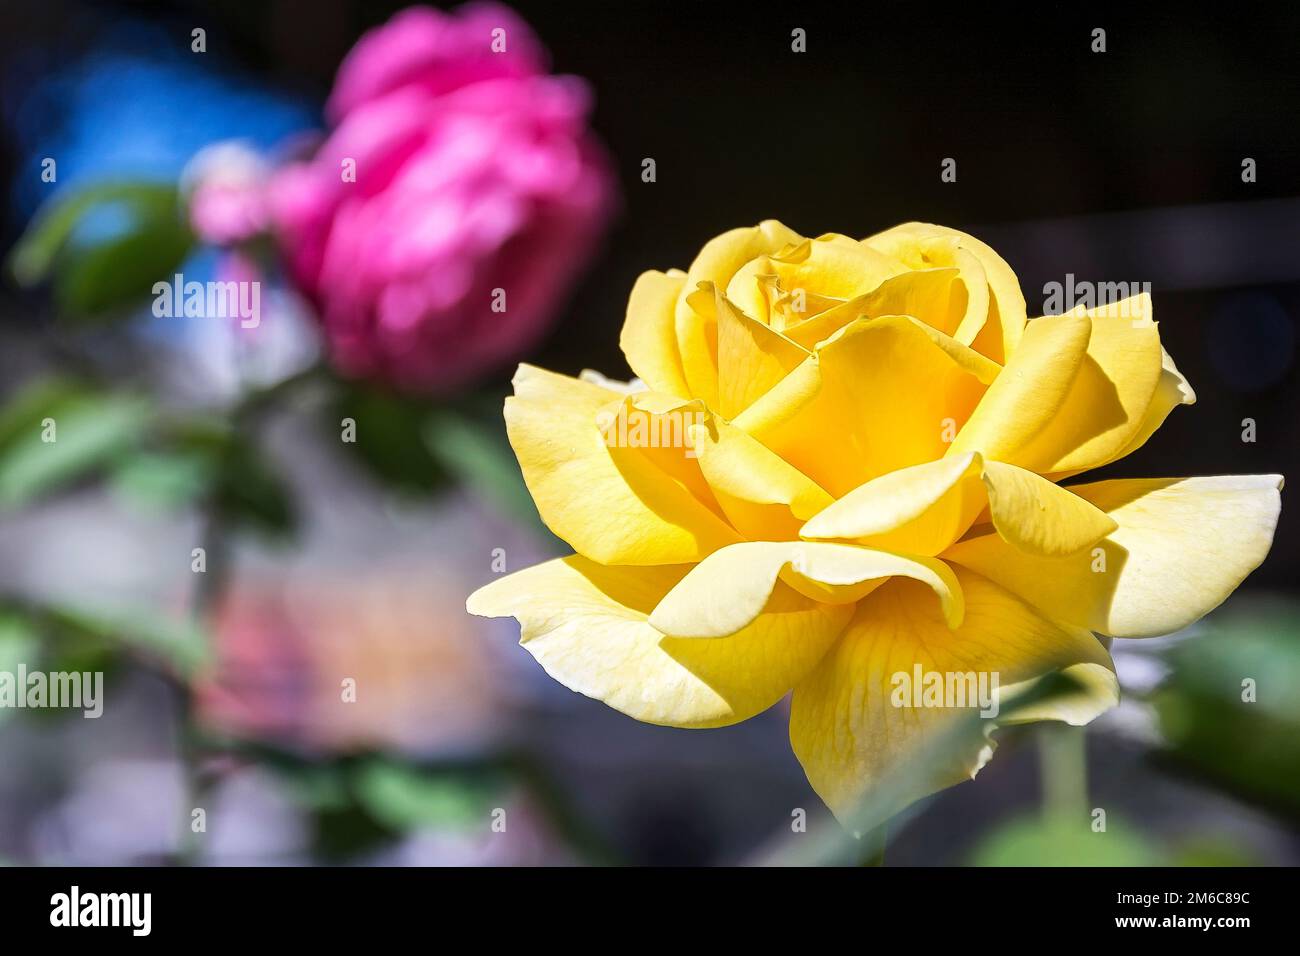 Flower of a blooming yellow rose on a blurred background Stock Photo